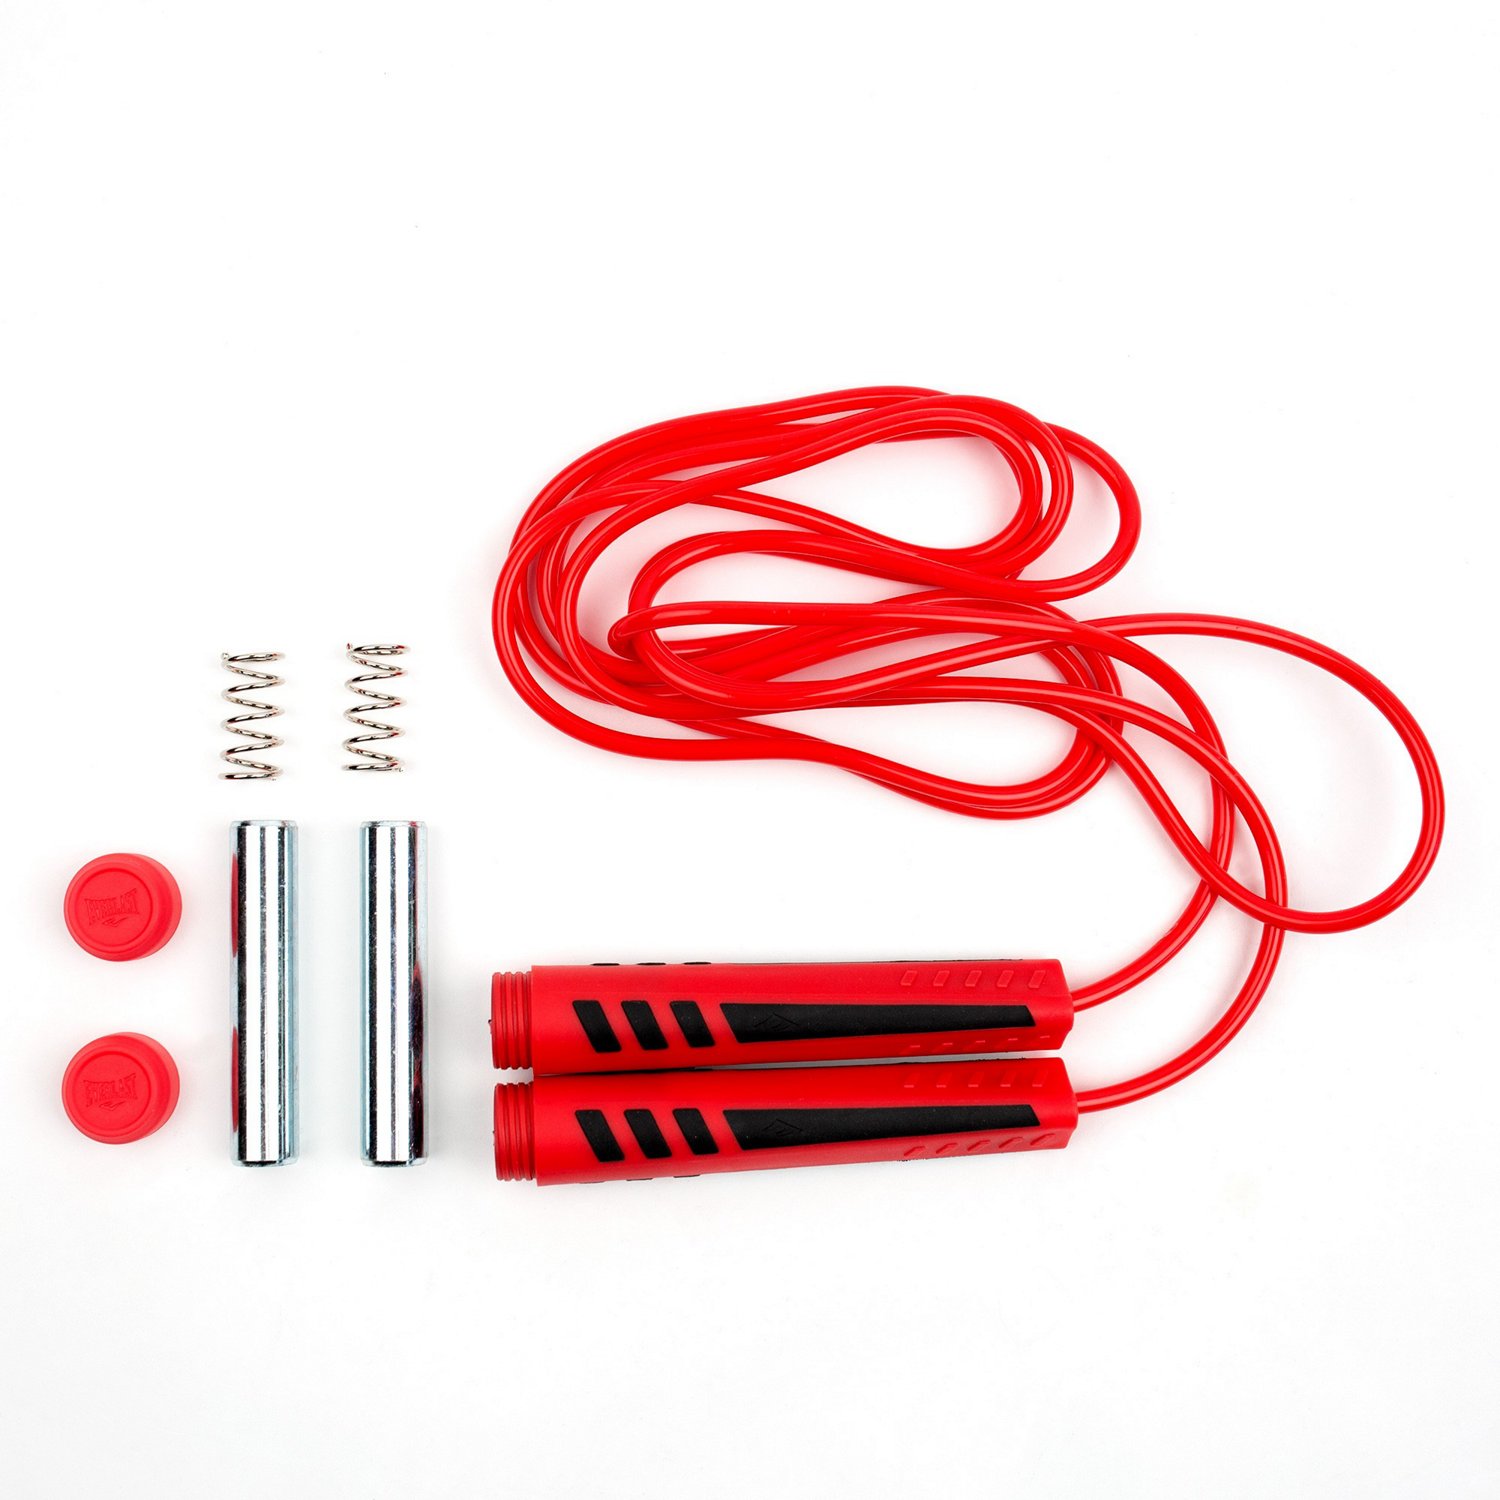 Weighted Jump Rope